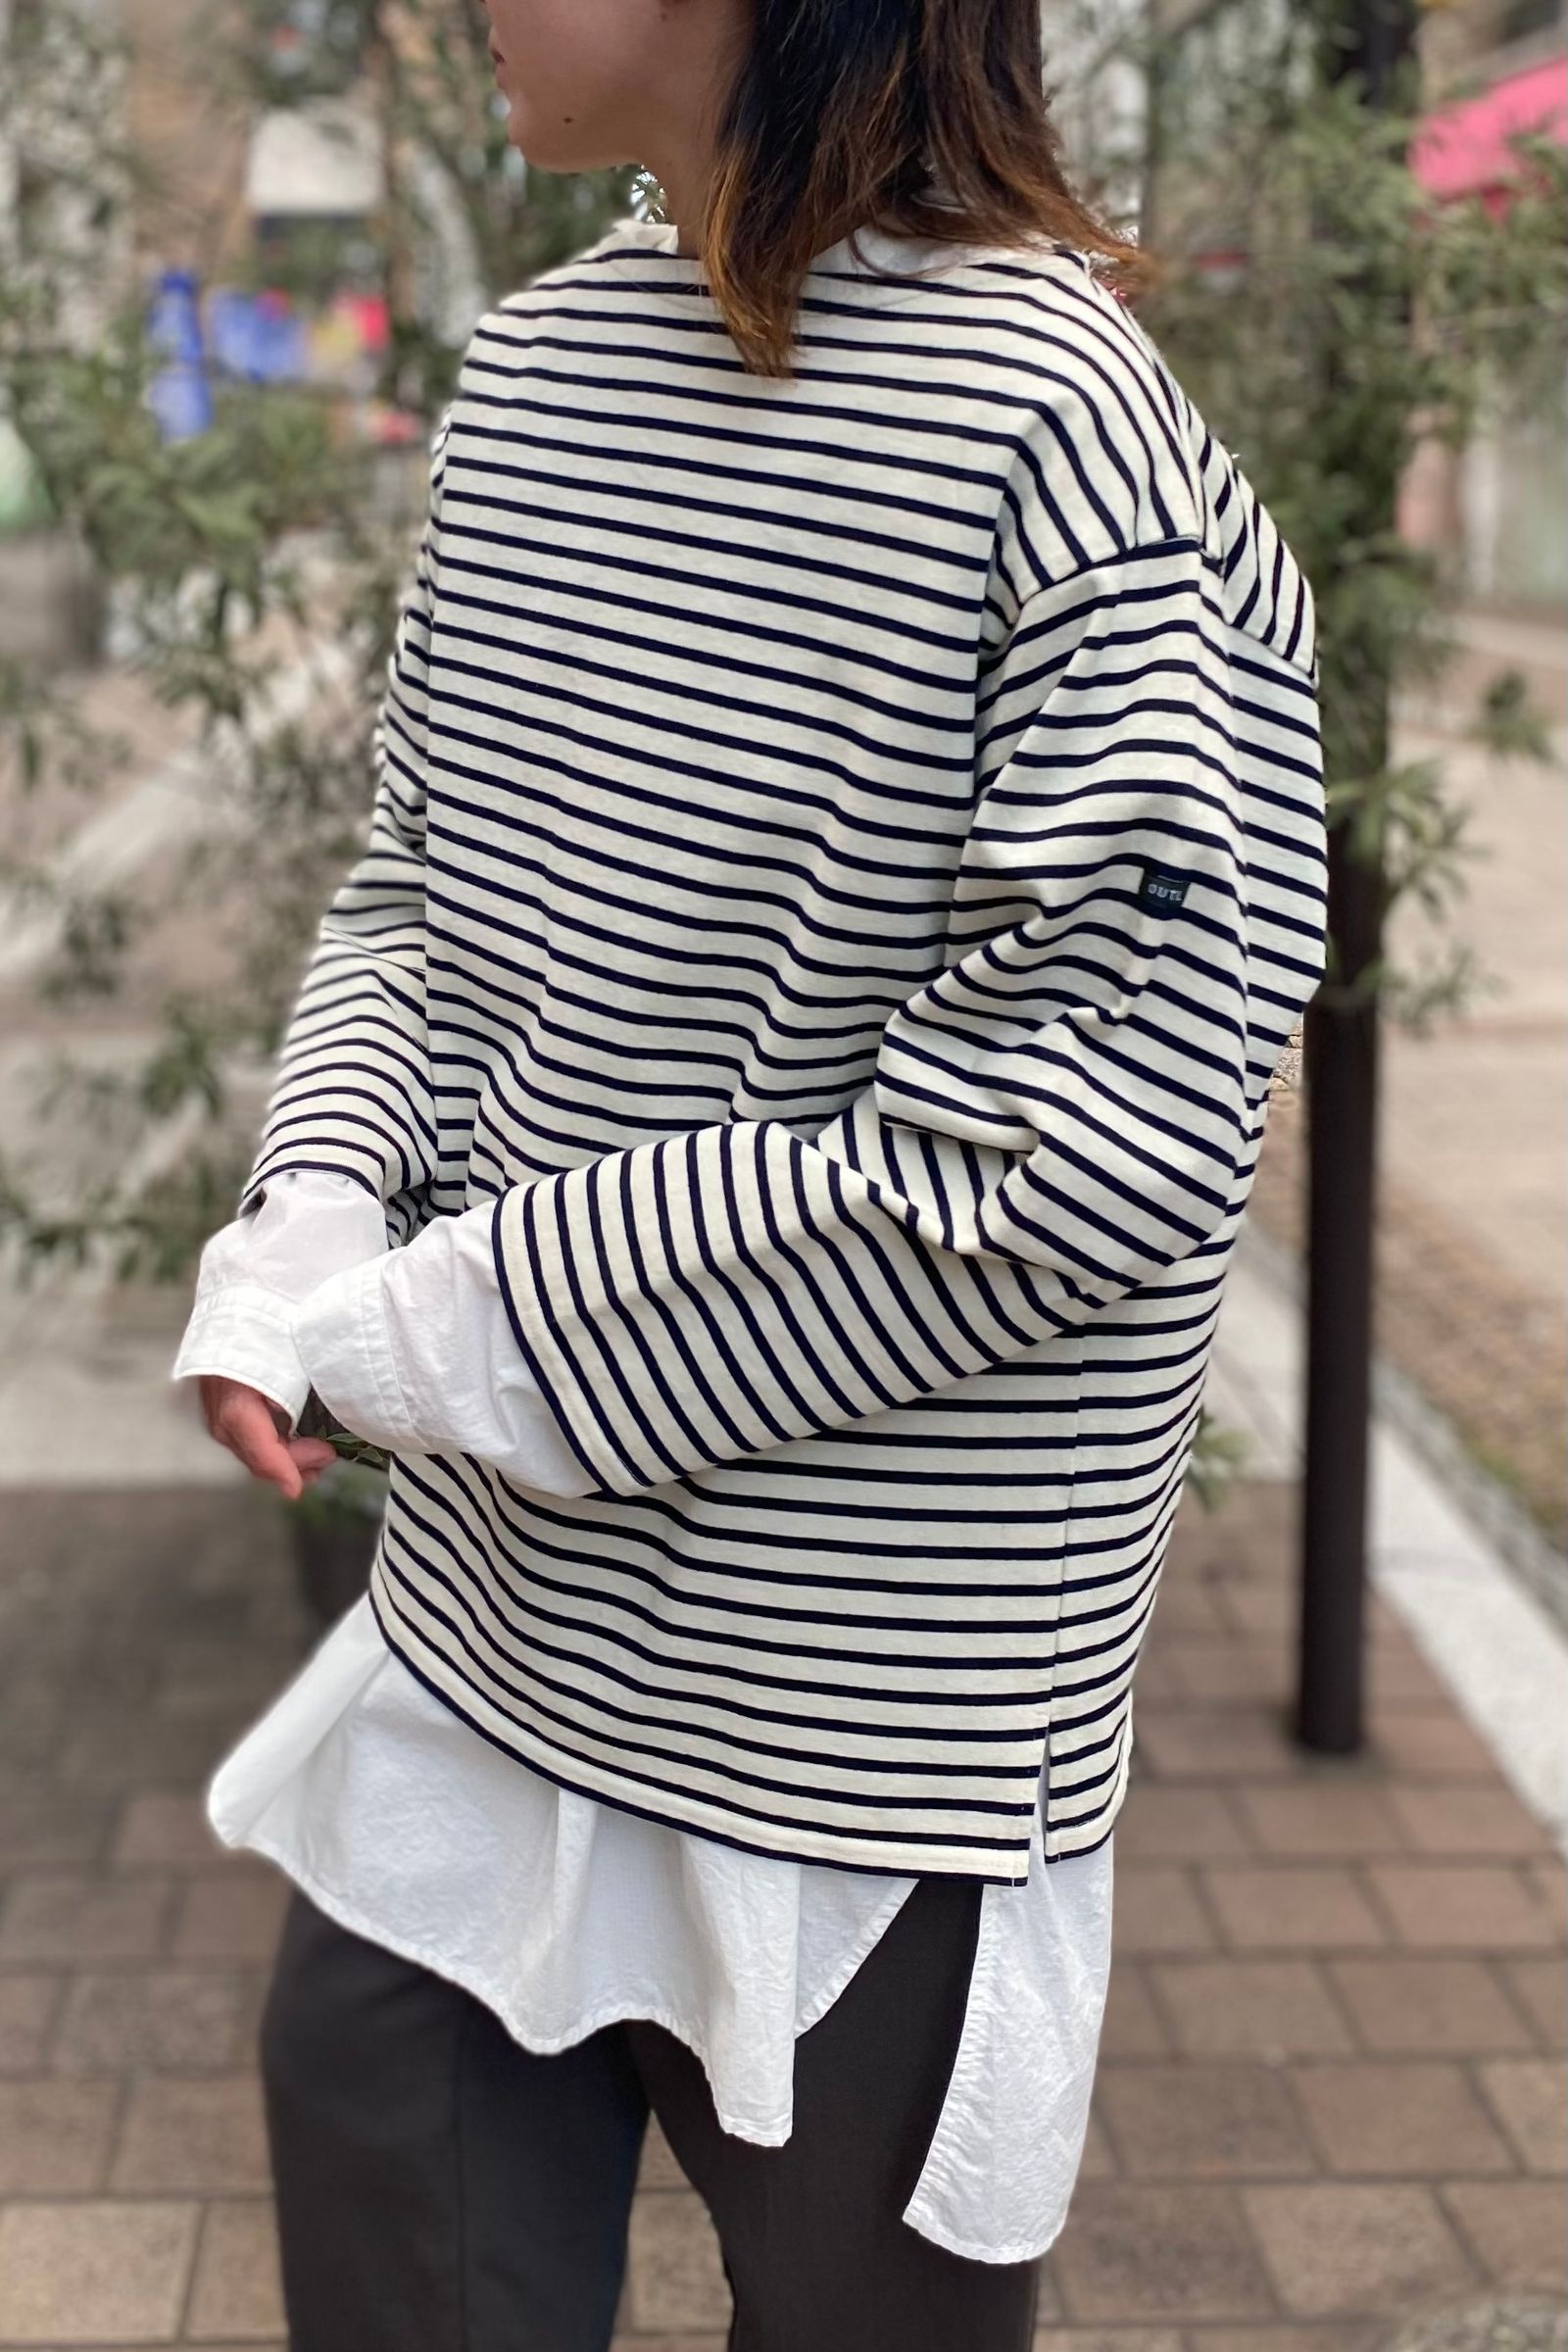 OUTIL - バスクシャツ/tricot aast ラッセル編み -white/black - 22aw 